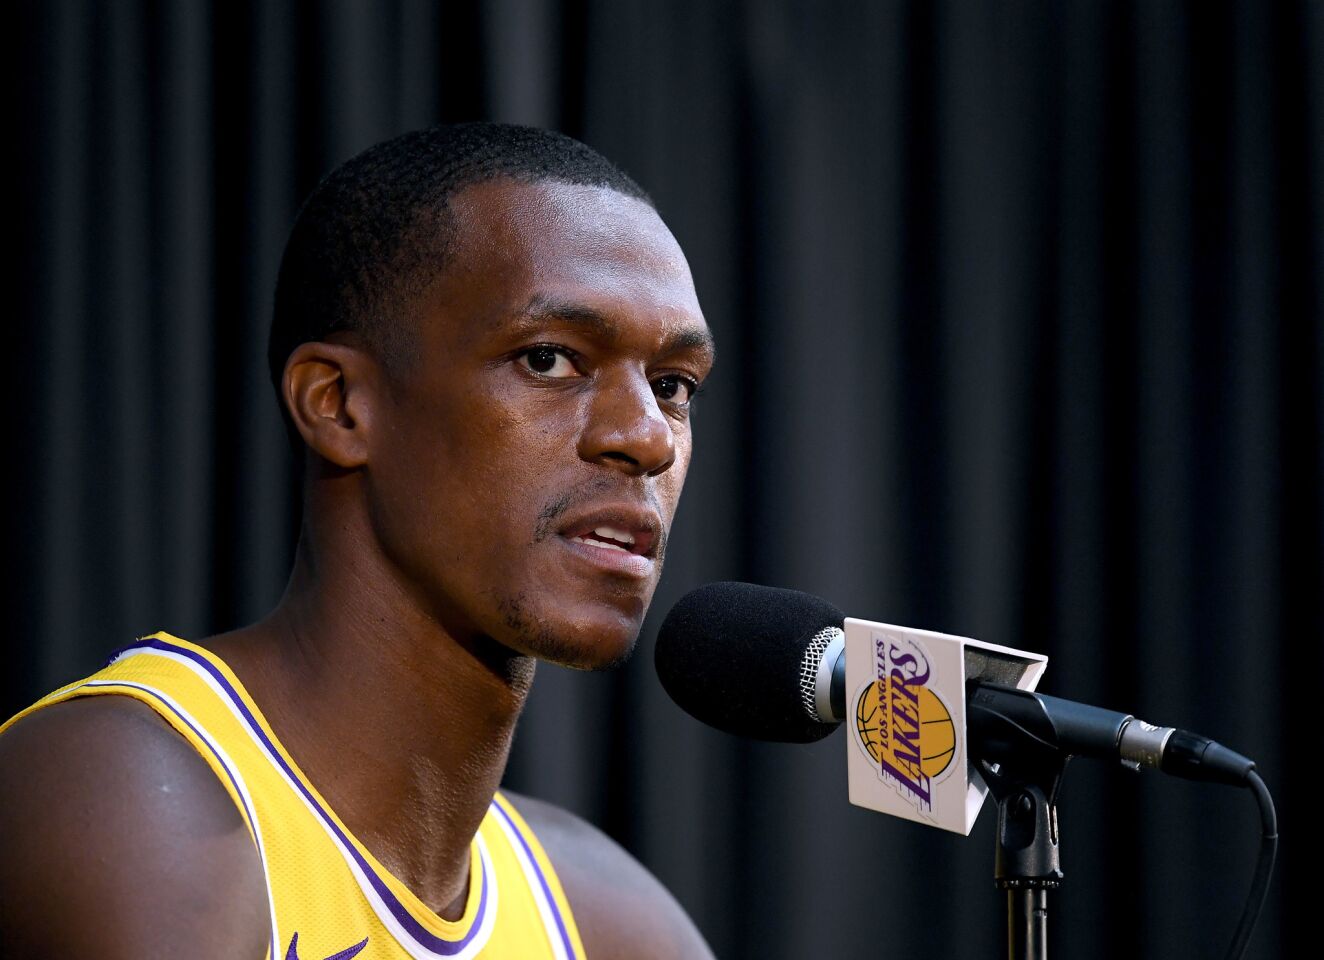 EL SEGUNDO, CA - SEPTEMBER 24: Rajon Rondo of the Los Angeles Lakers speaks to the press during the Los Angeles Lakers Media Day at the UCLA Health Training Center on September 24, 2018 in El Segundo, California. (Photo by Harry How/Getty Images) ** OUTS - ELSENT, FPG, CM - OUTS * NM, PH, VA if sourced by CT, LA or MoD **